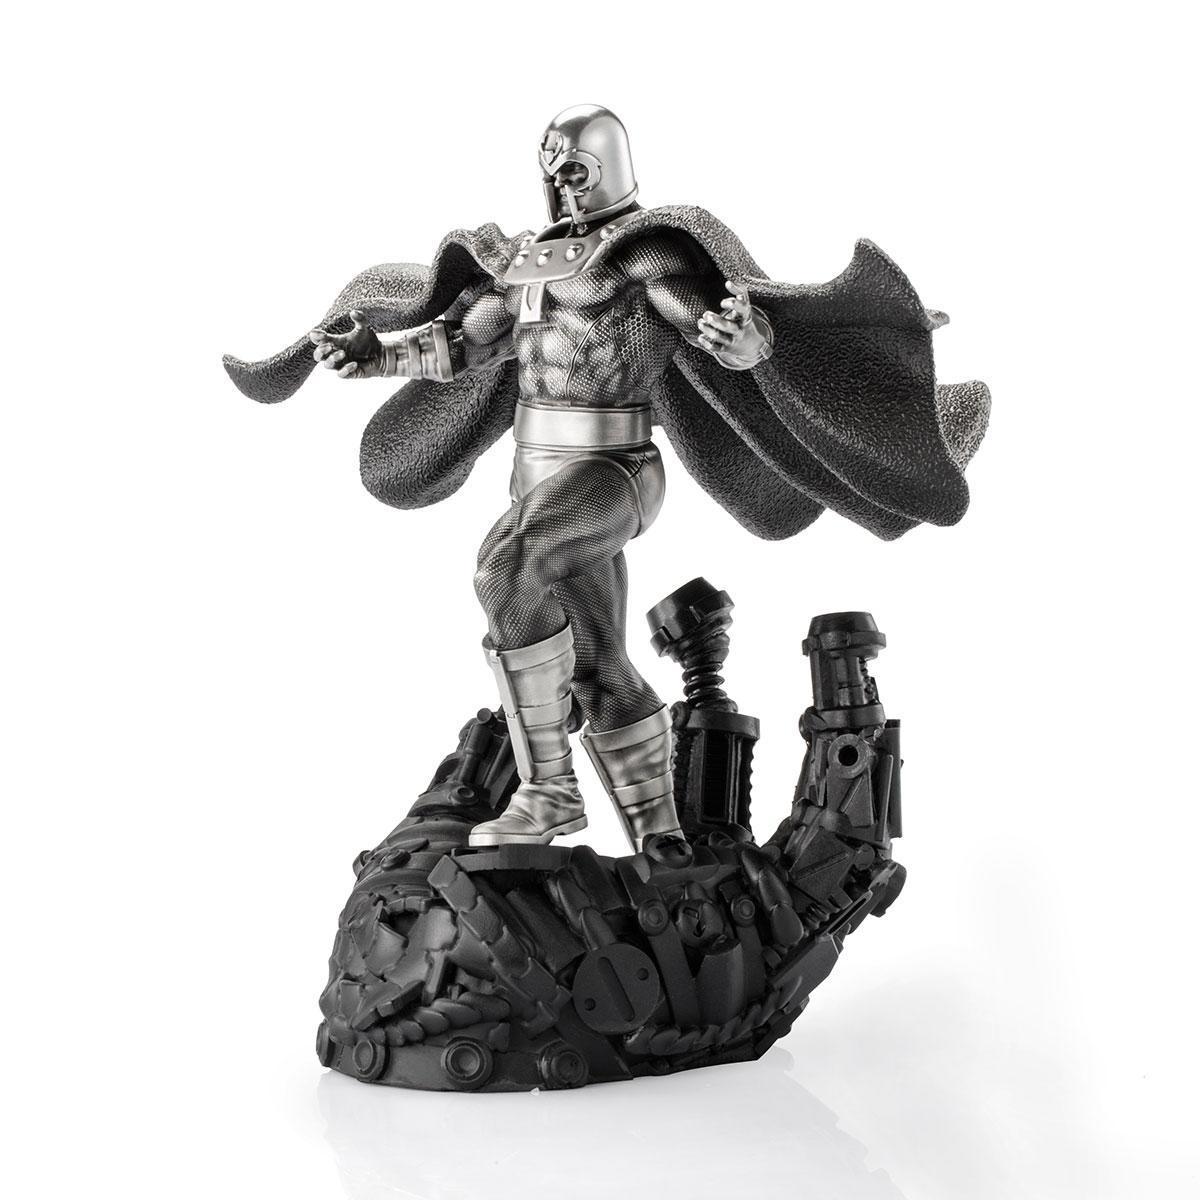 Limited Edition Magneto Dominant Figurine - Royal Selangor Marvel Collection